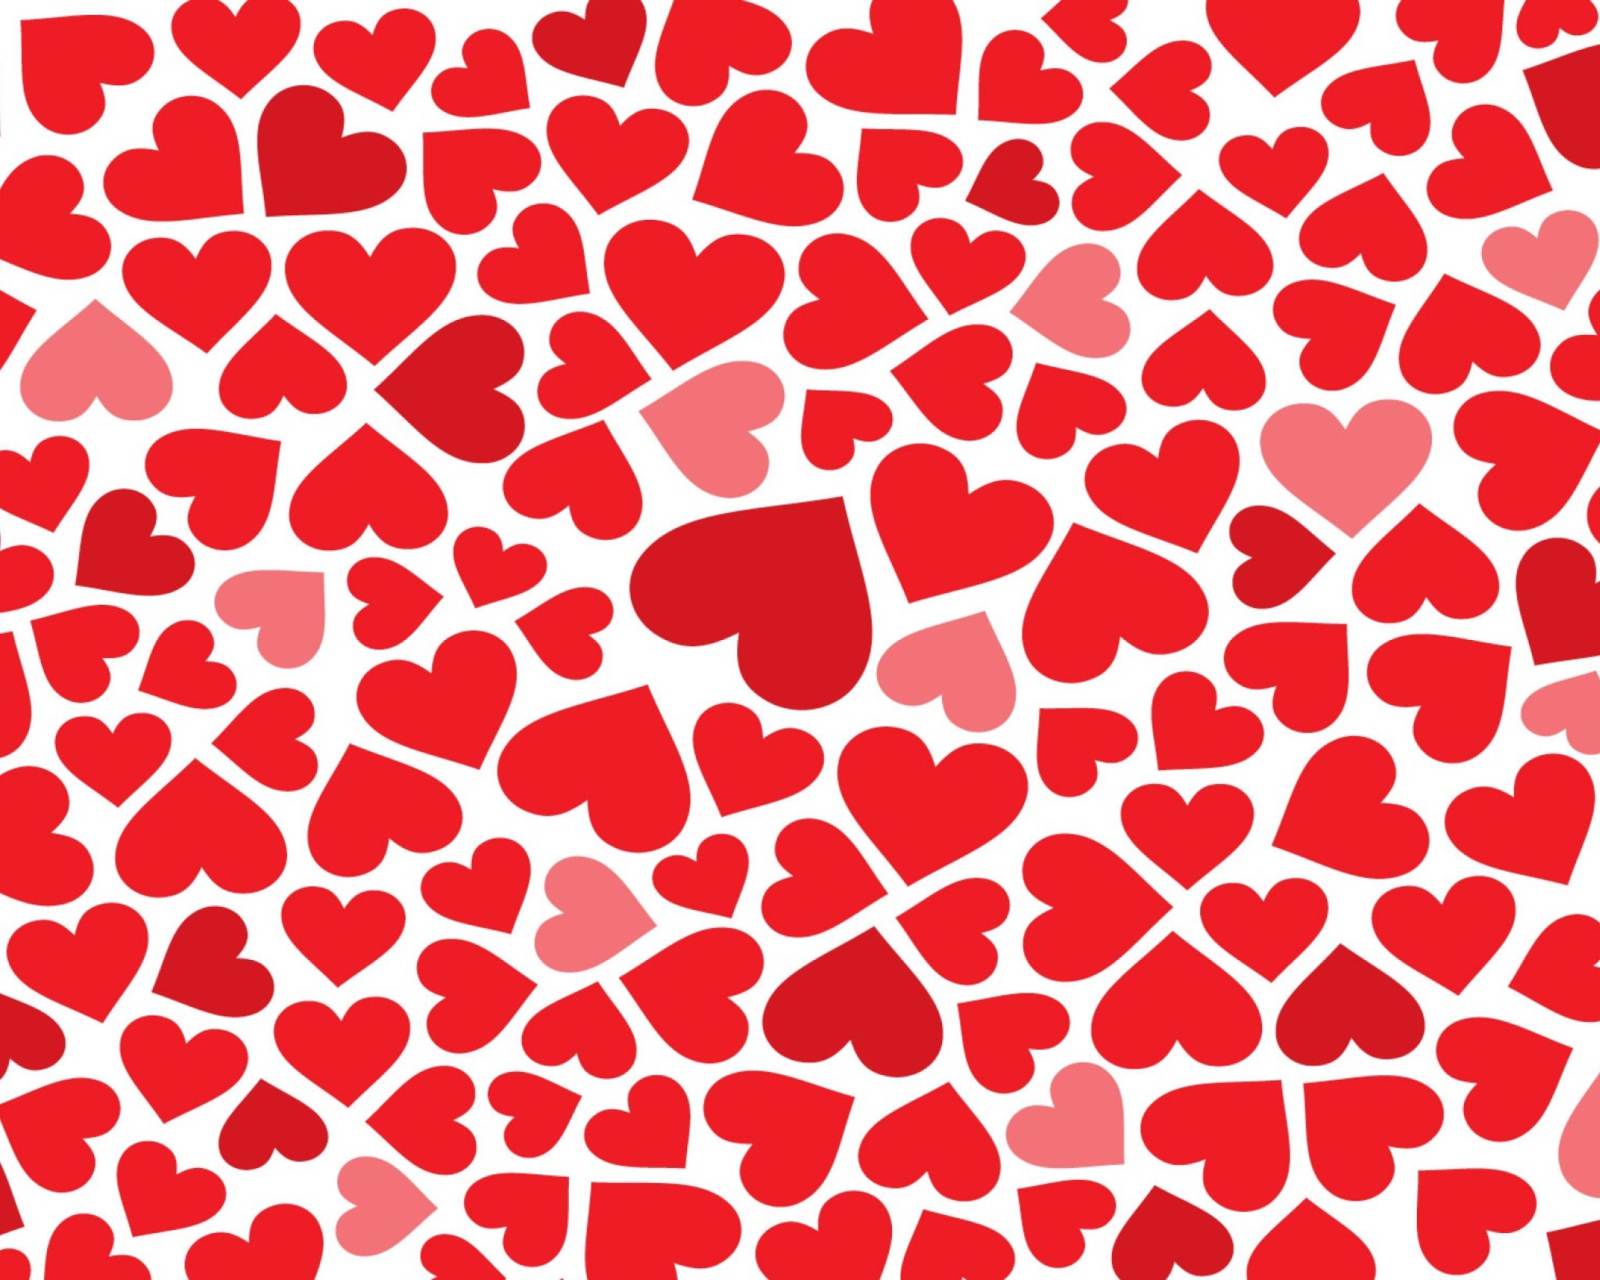 Red Hearts wallpaper 1600x1280